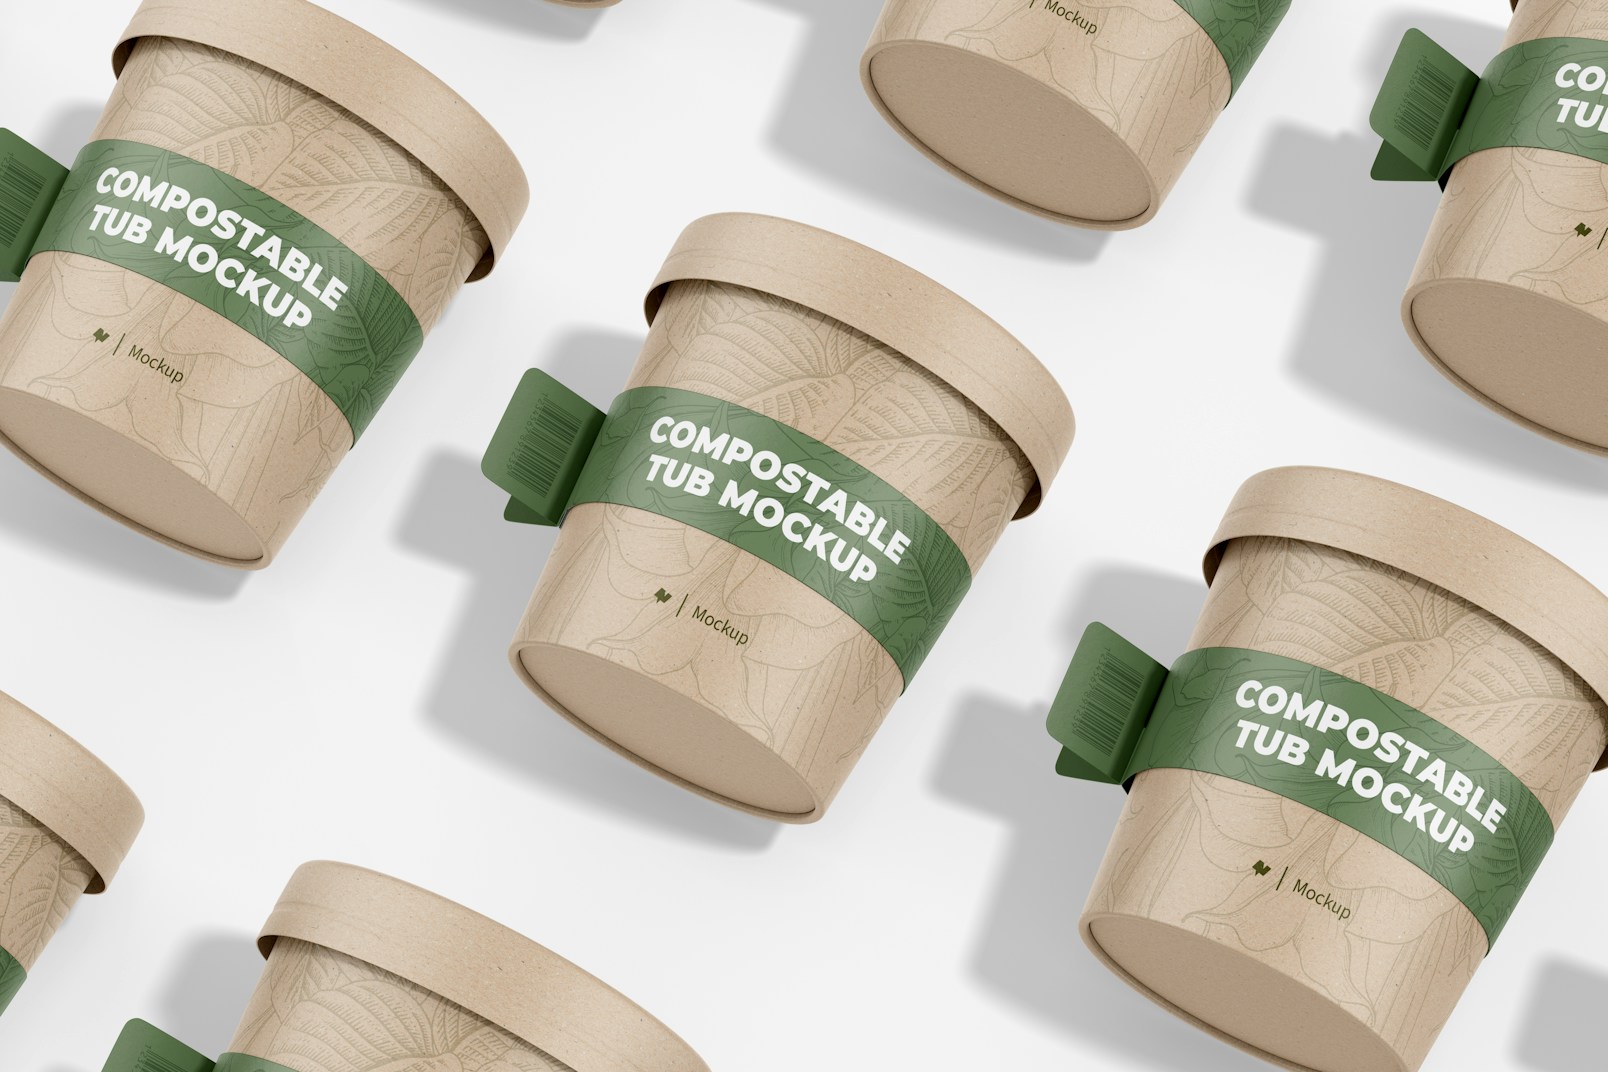 Compostable Tubs with Label Mockup